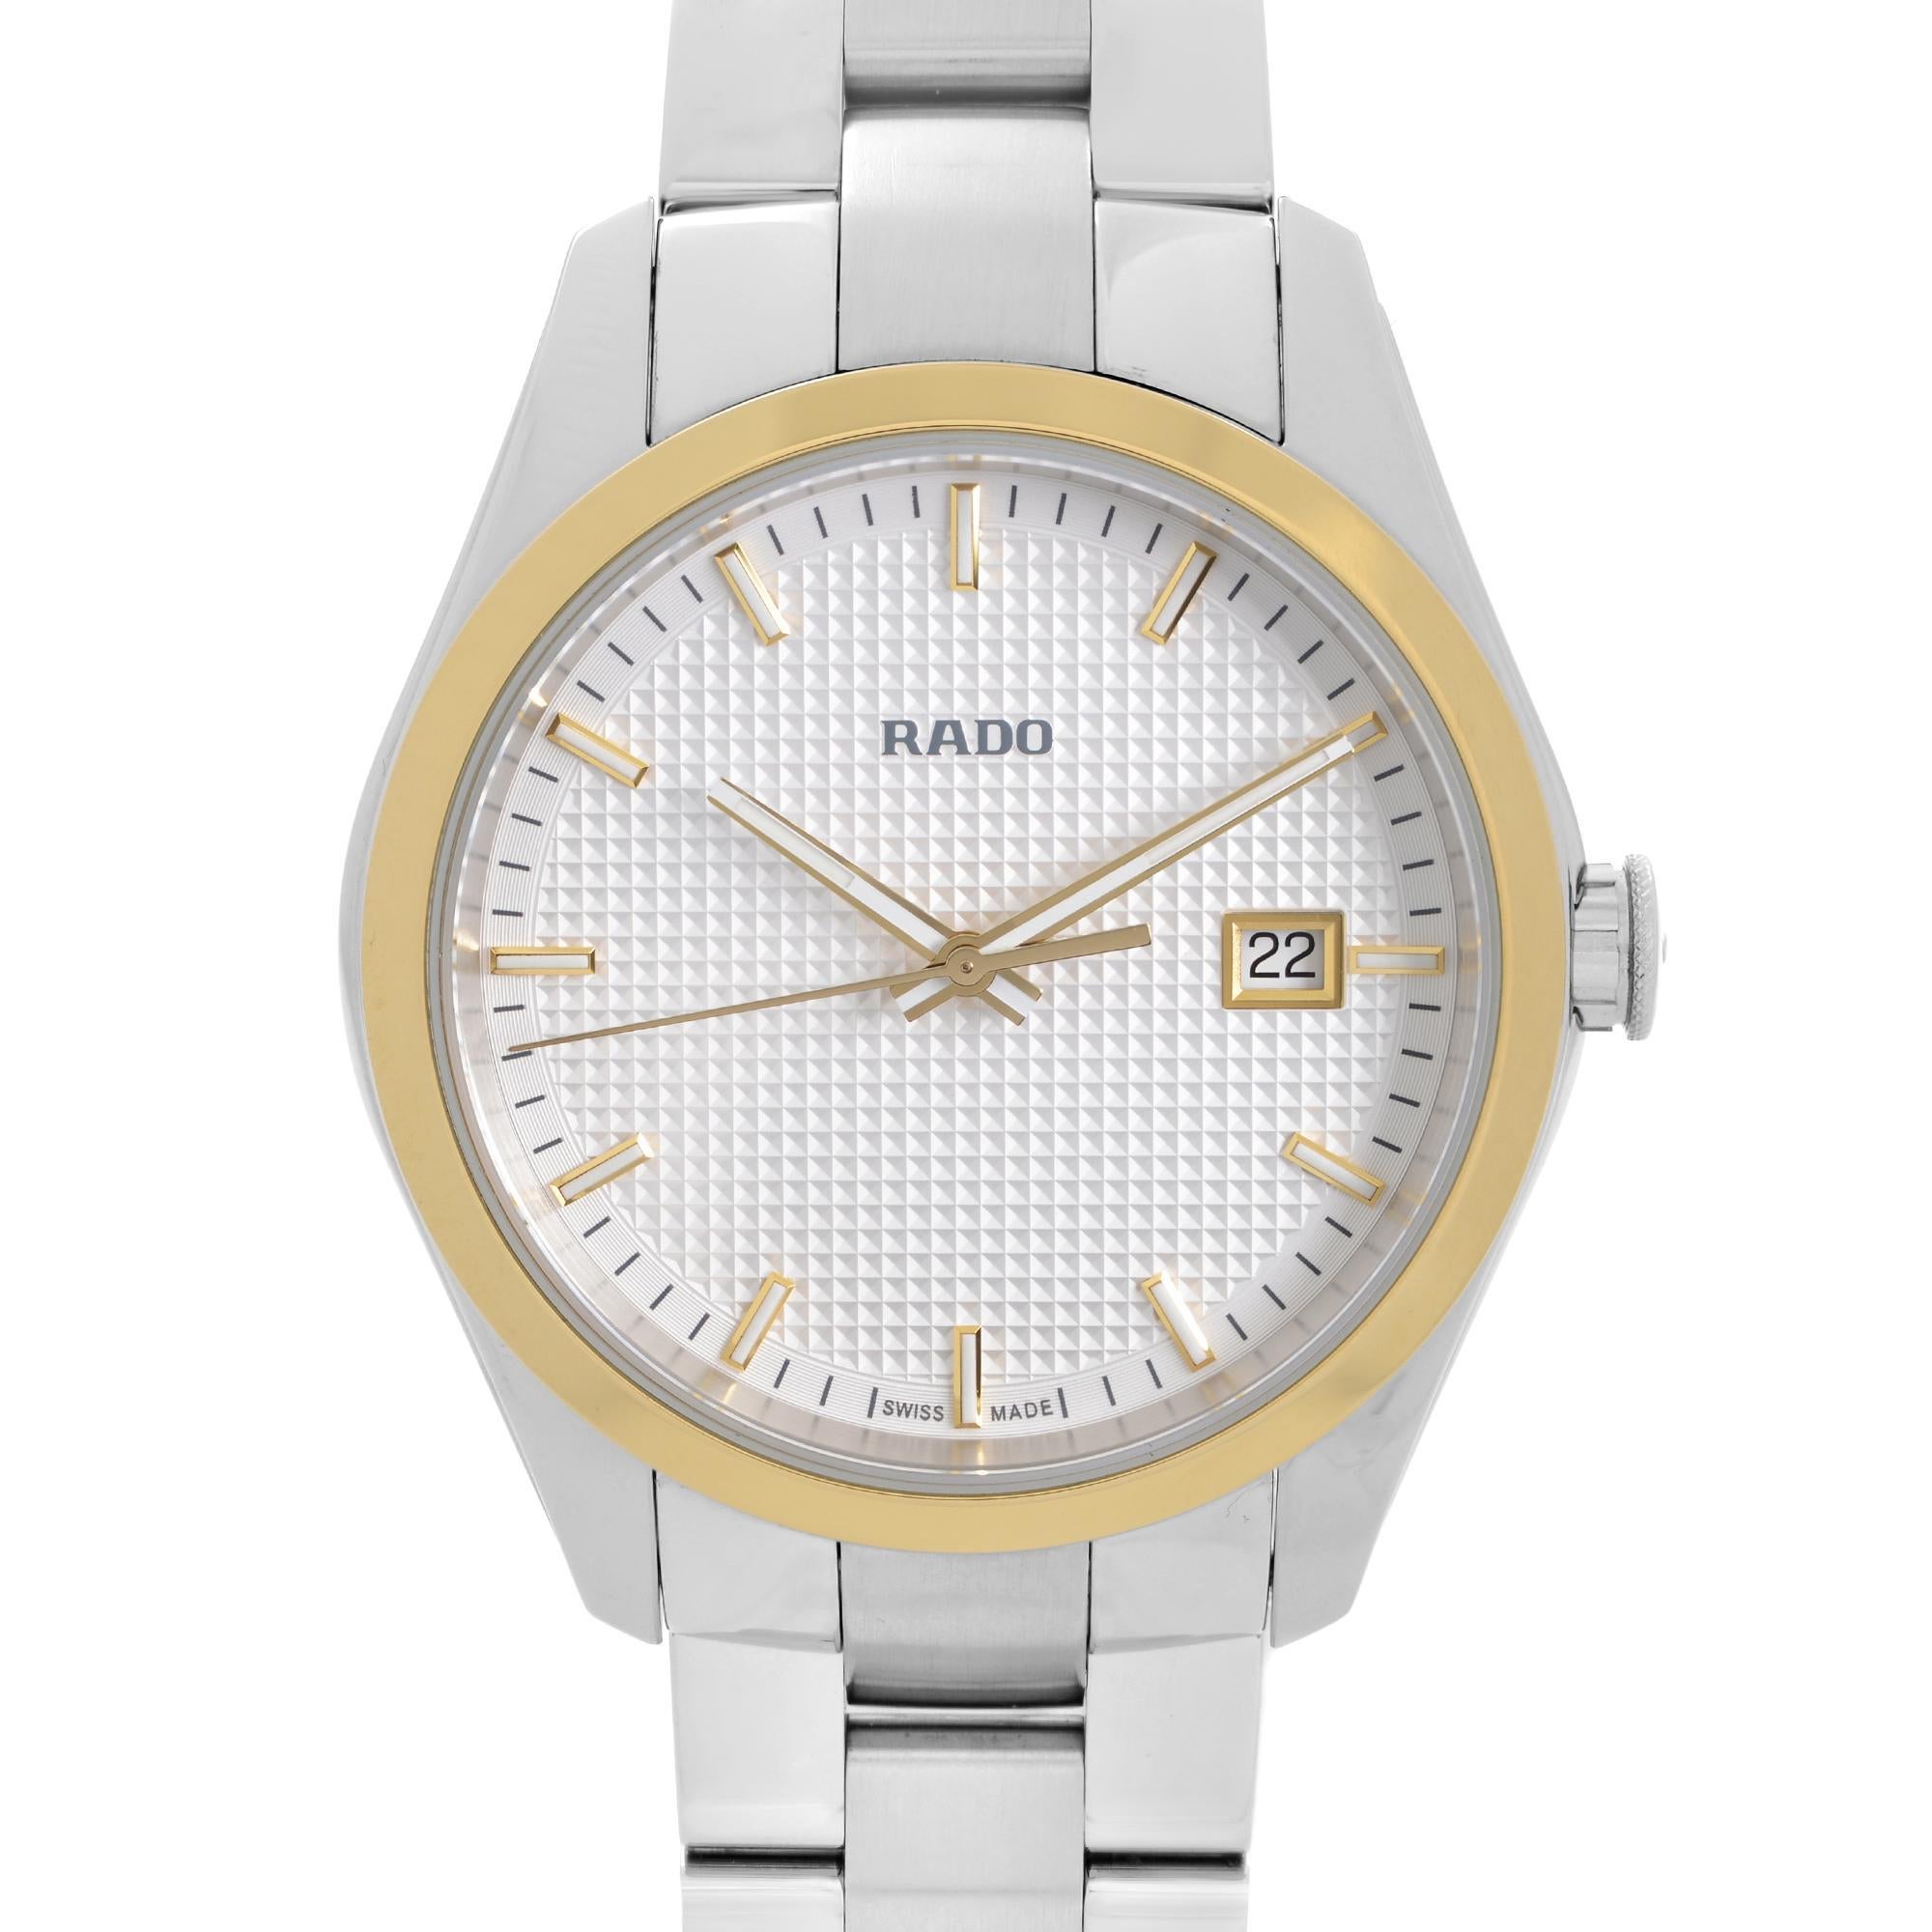 Display Model Rado Hyperchrome 40mm Ceramos Date Silver Dial Men Quartz Watch R32188123. This Timepiece is Powered by a Quartz (Battery) Movement and Features: Ceramos Case and Bracelet, Fixed Gold-Tone Bezel, Silver Dial with Gold-Tone Hands and